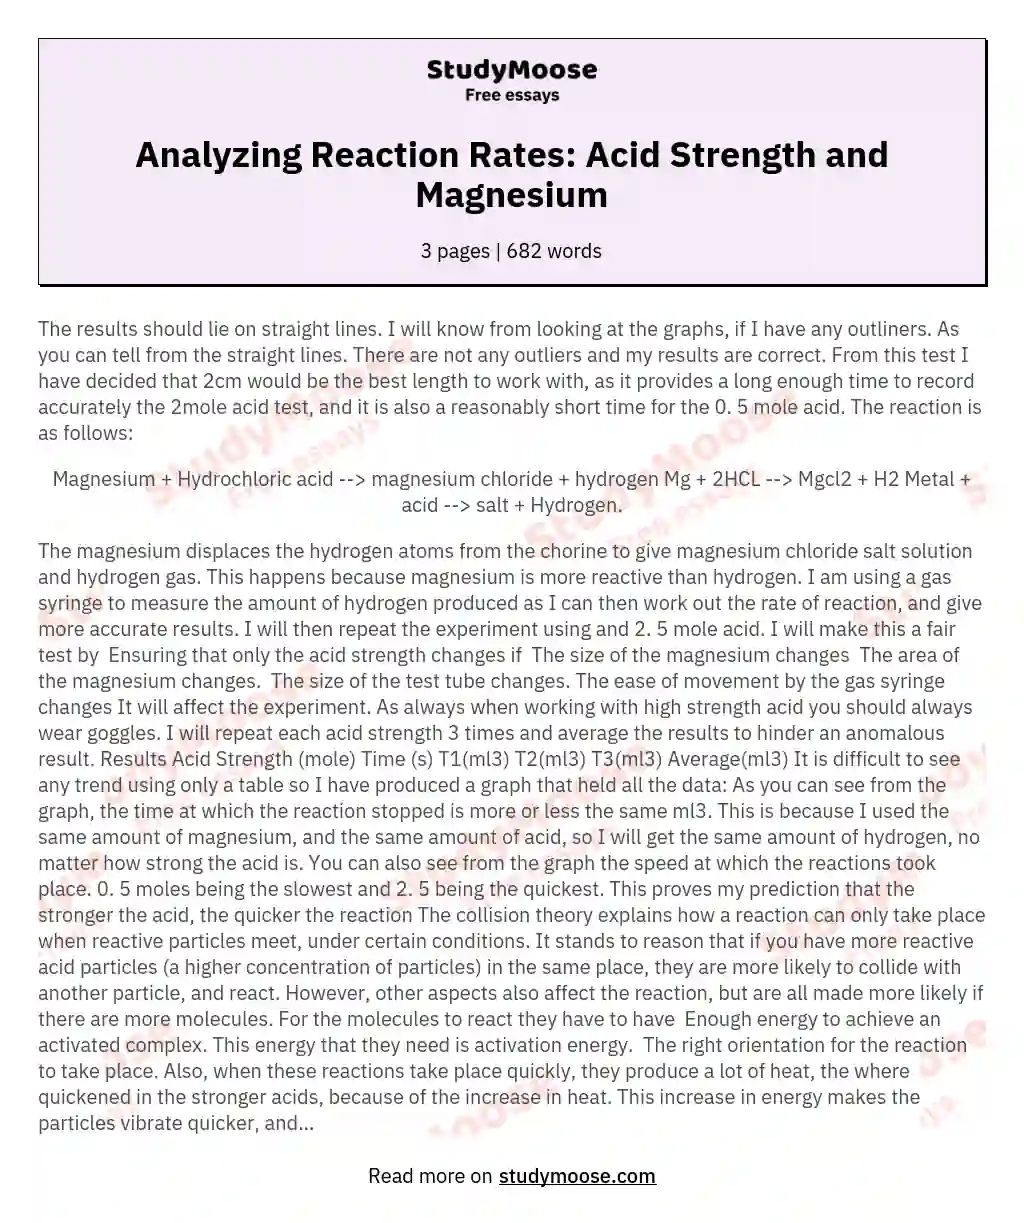 Analyzing Reaction Rates: Acid Strength and Magnesium essay